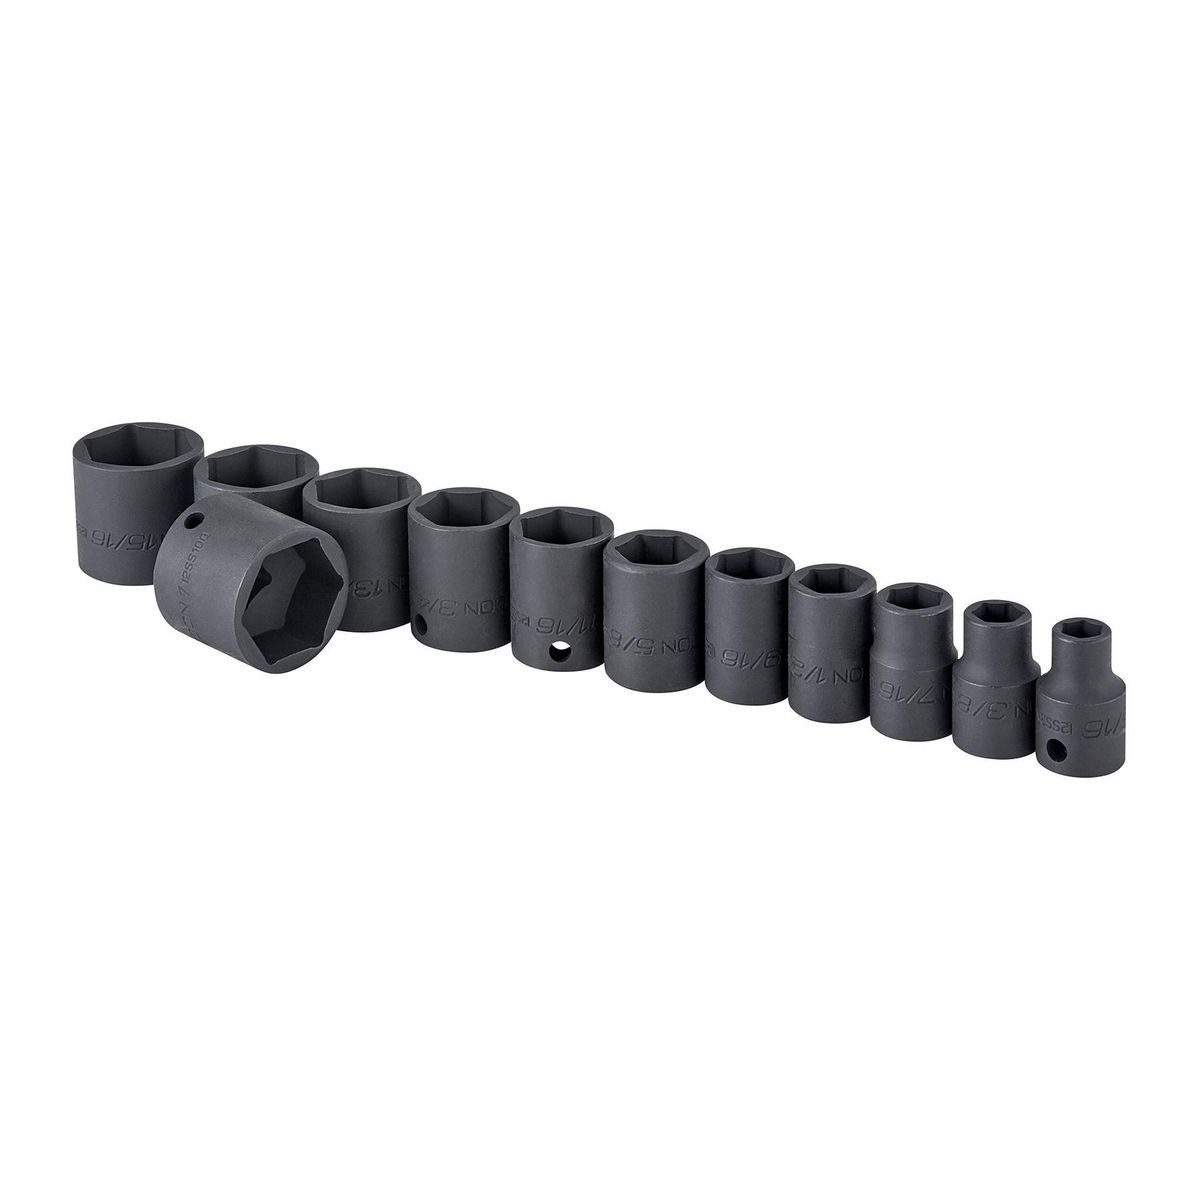 ICON 3/8 in. Drive SAE Professional Impact Socket Set, 12 Piece